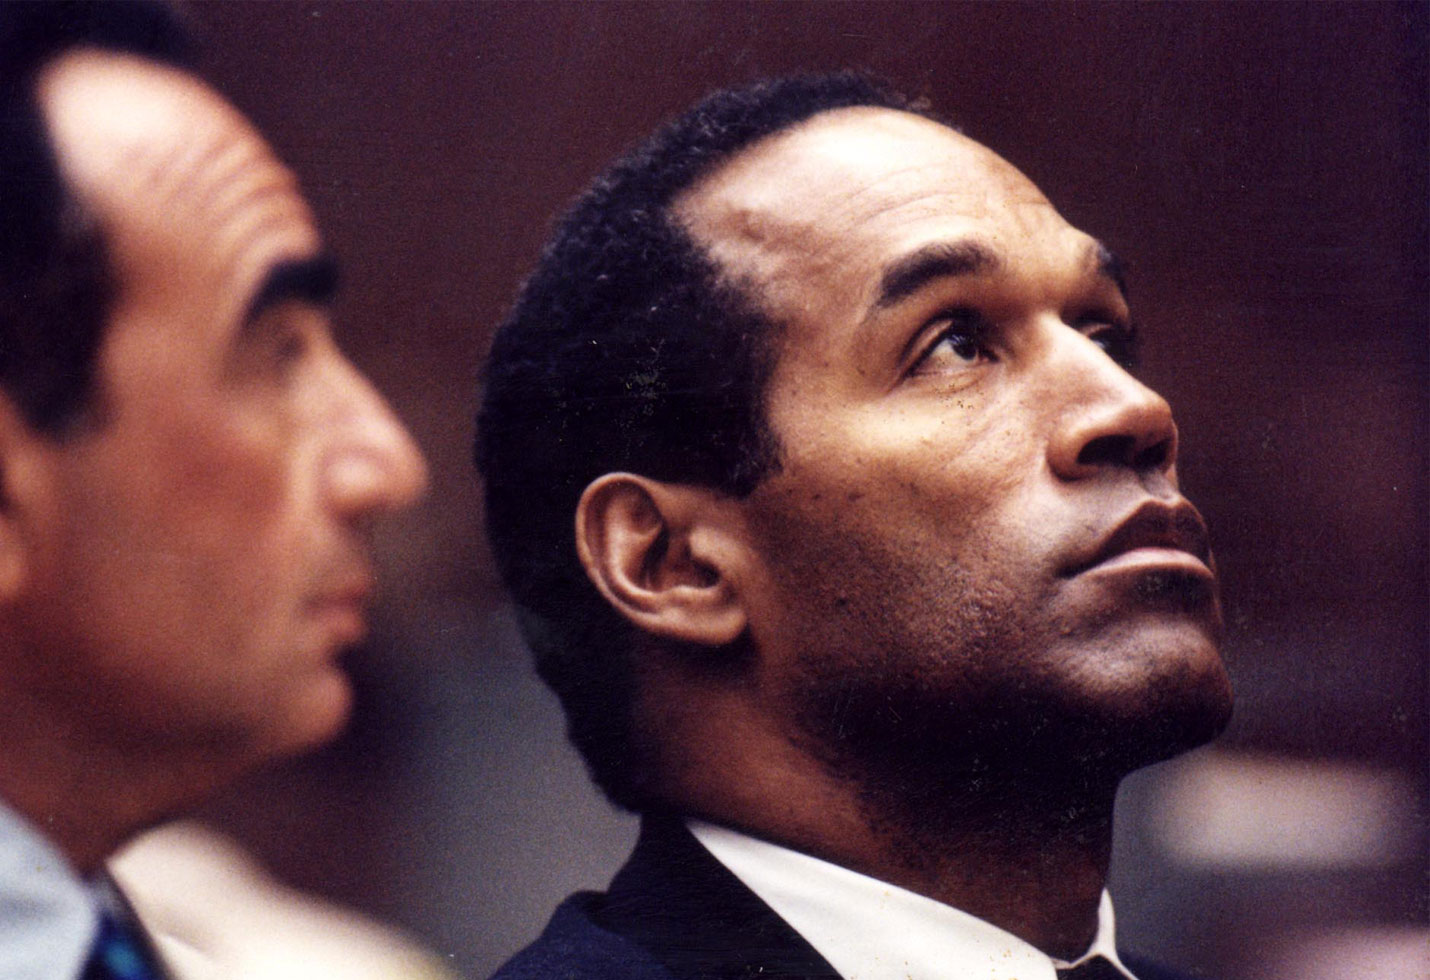 Jurors Explain Why They Acquitted O.J. Simpson In Nicole Brown Murder